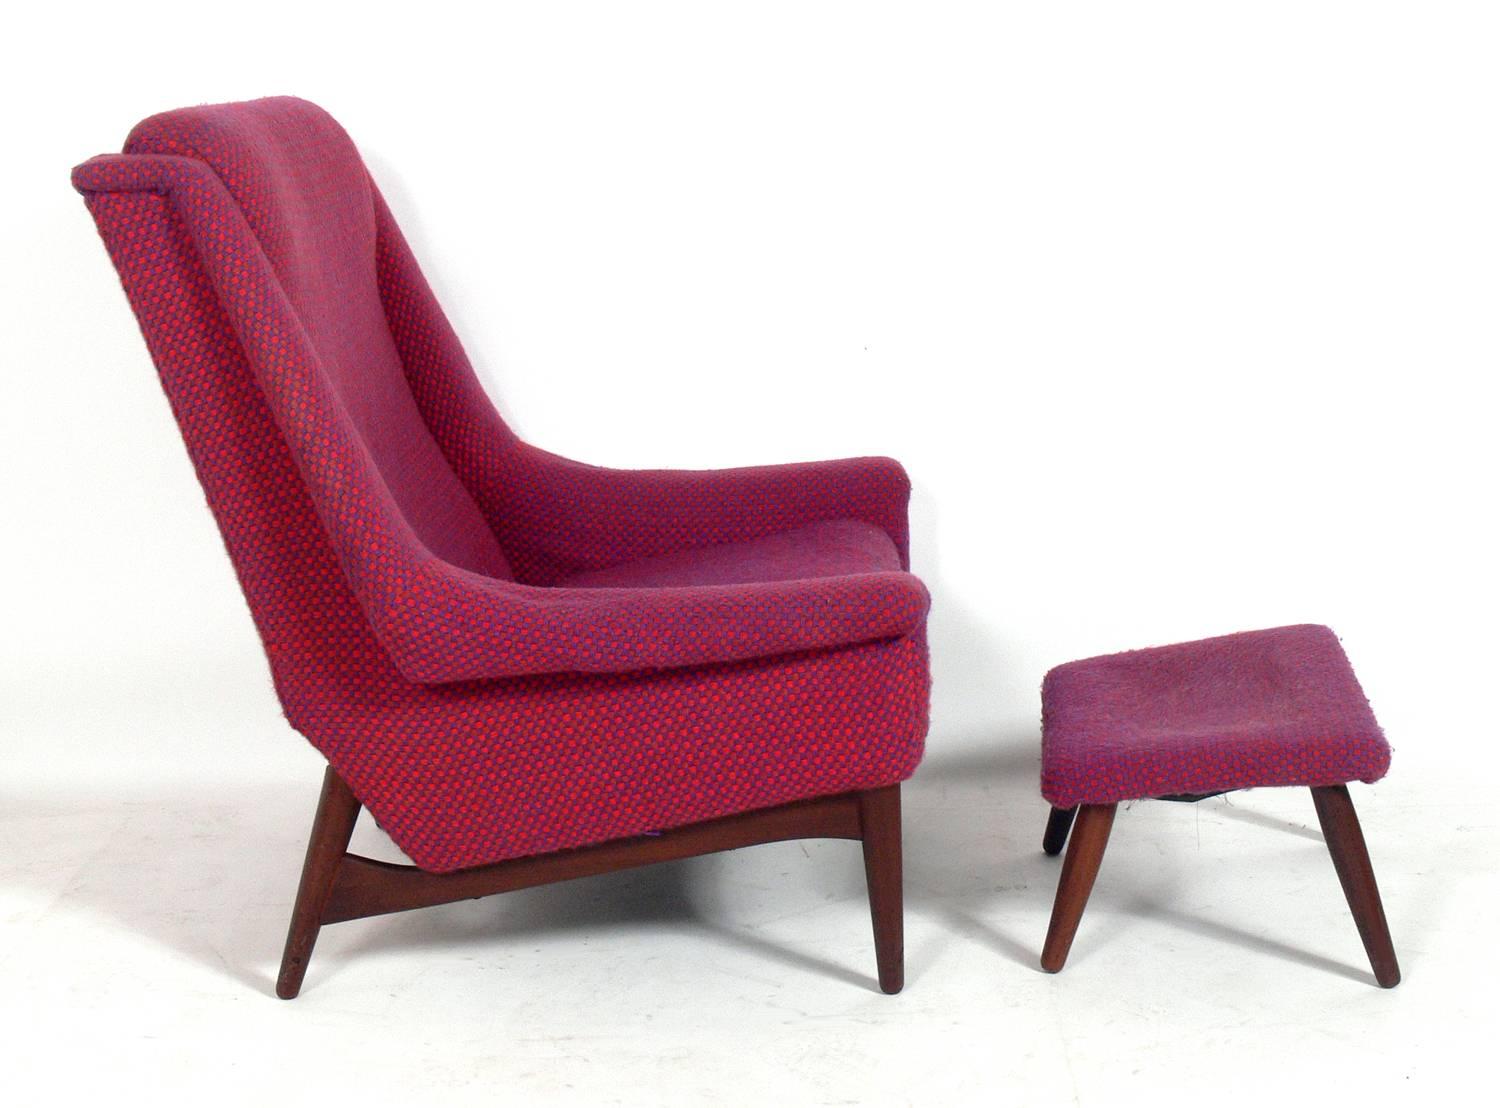 Danish Modern lounge chair and ottoman attributed to Folke Ohlsson, Denmark, circa 1960s. This chair and ottoman are currently being reupholstered and refinished and can be completed in your fabric. The price noted below includes reupholstery in